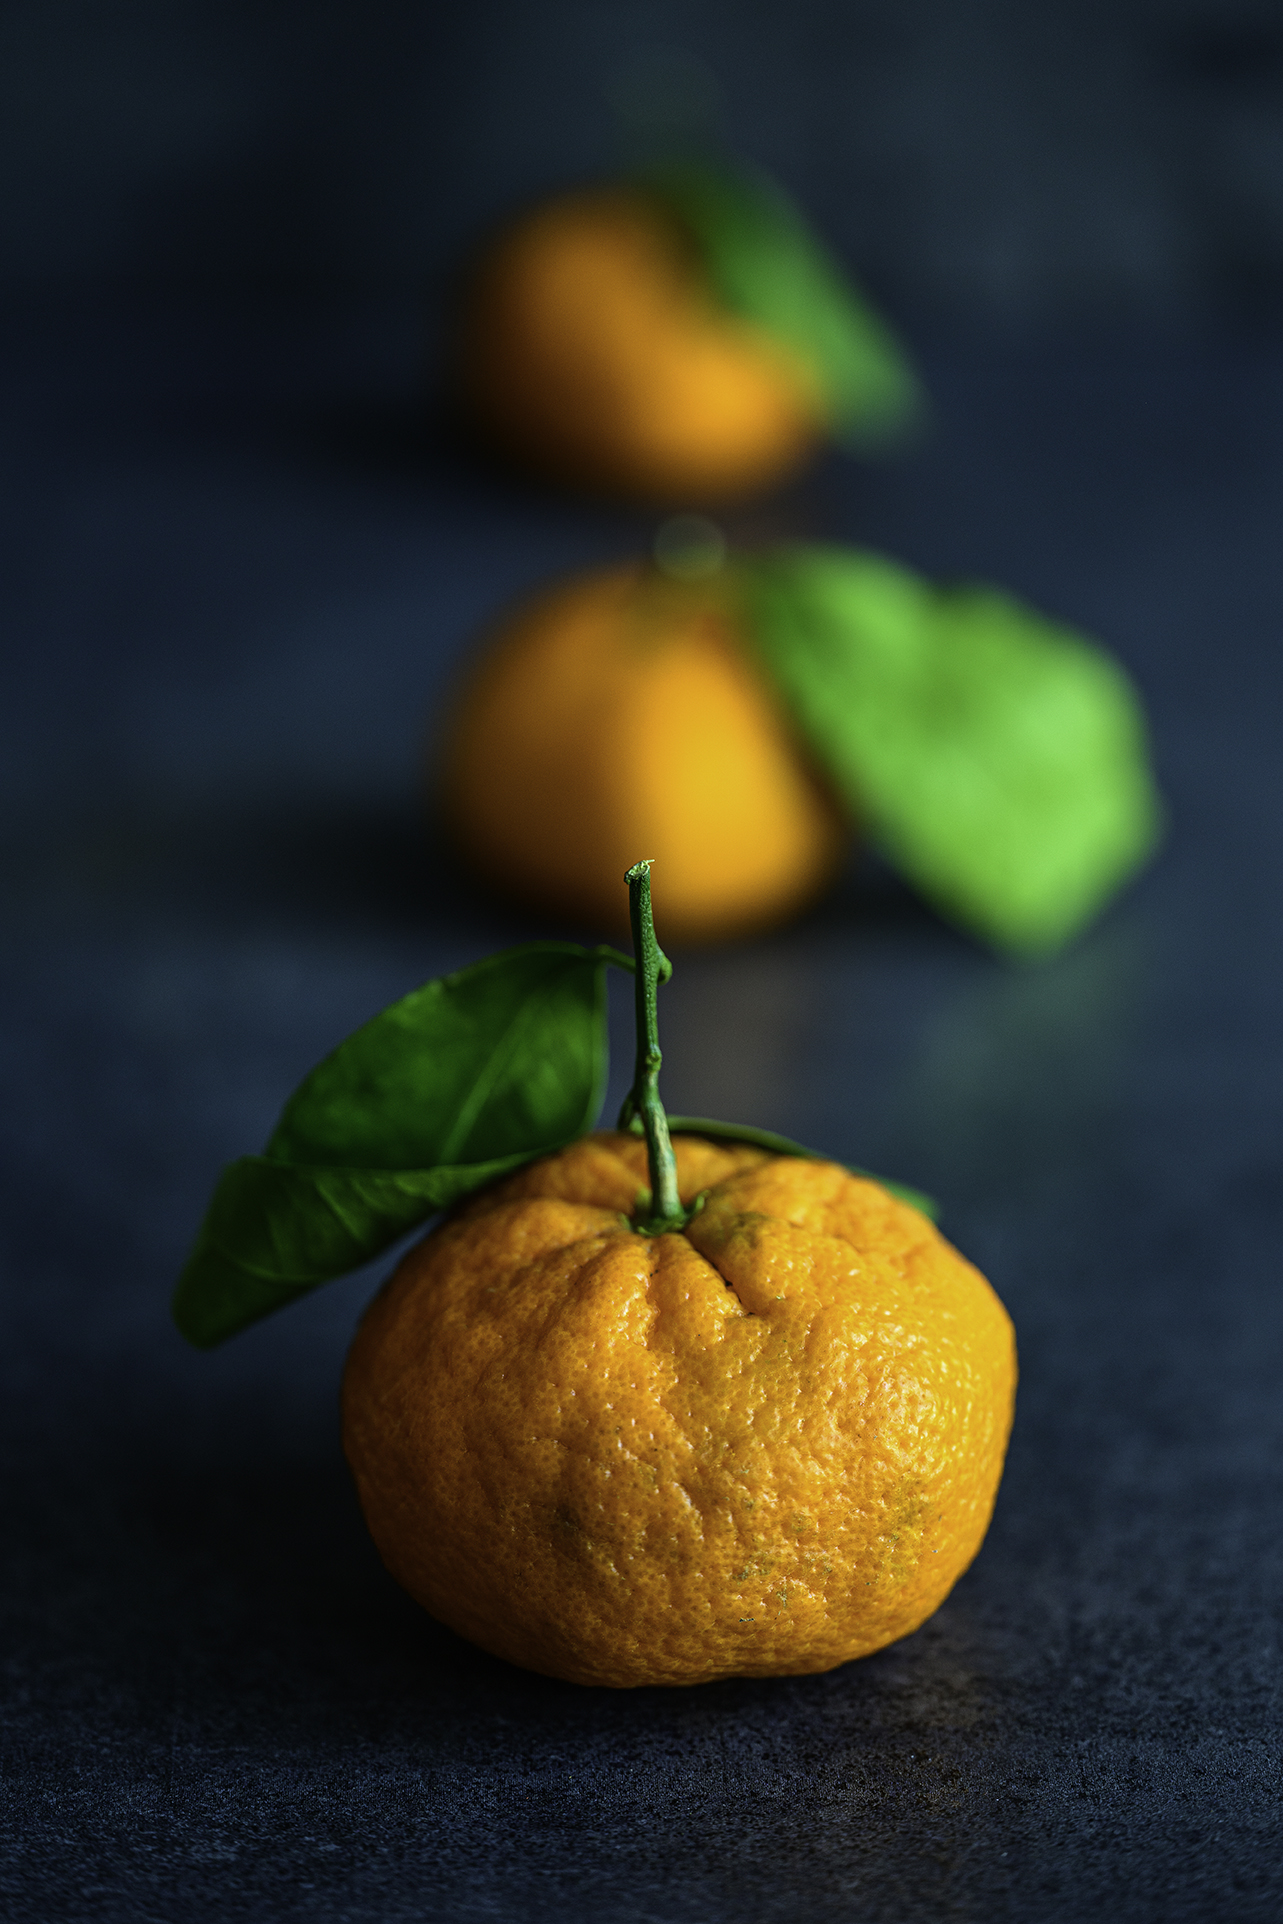 Three oranges in a row taken on a NIKKOR Z MC 105mm f2.8 VR S Lens